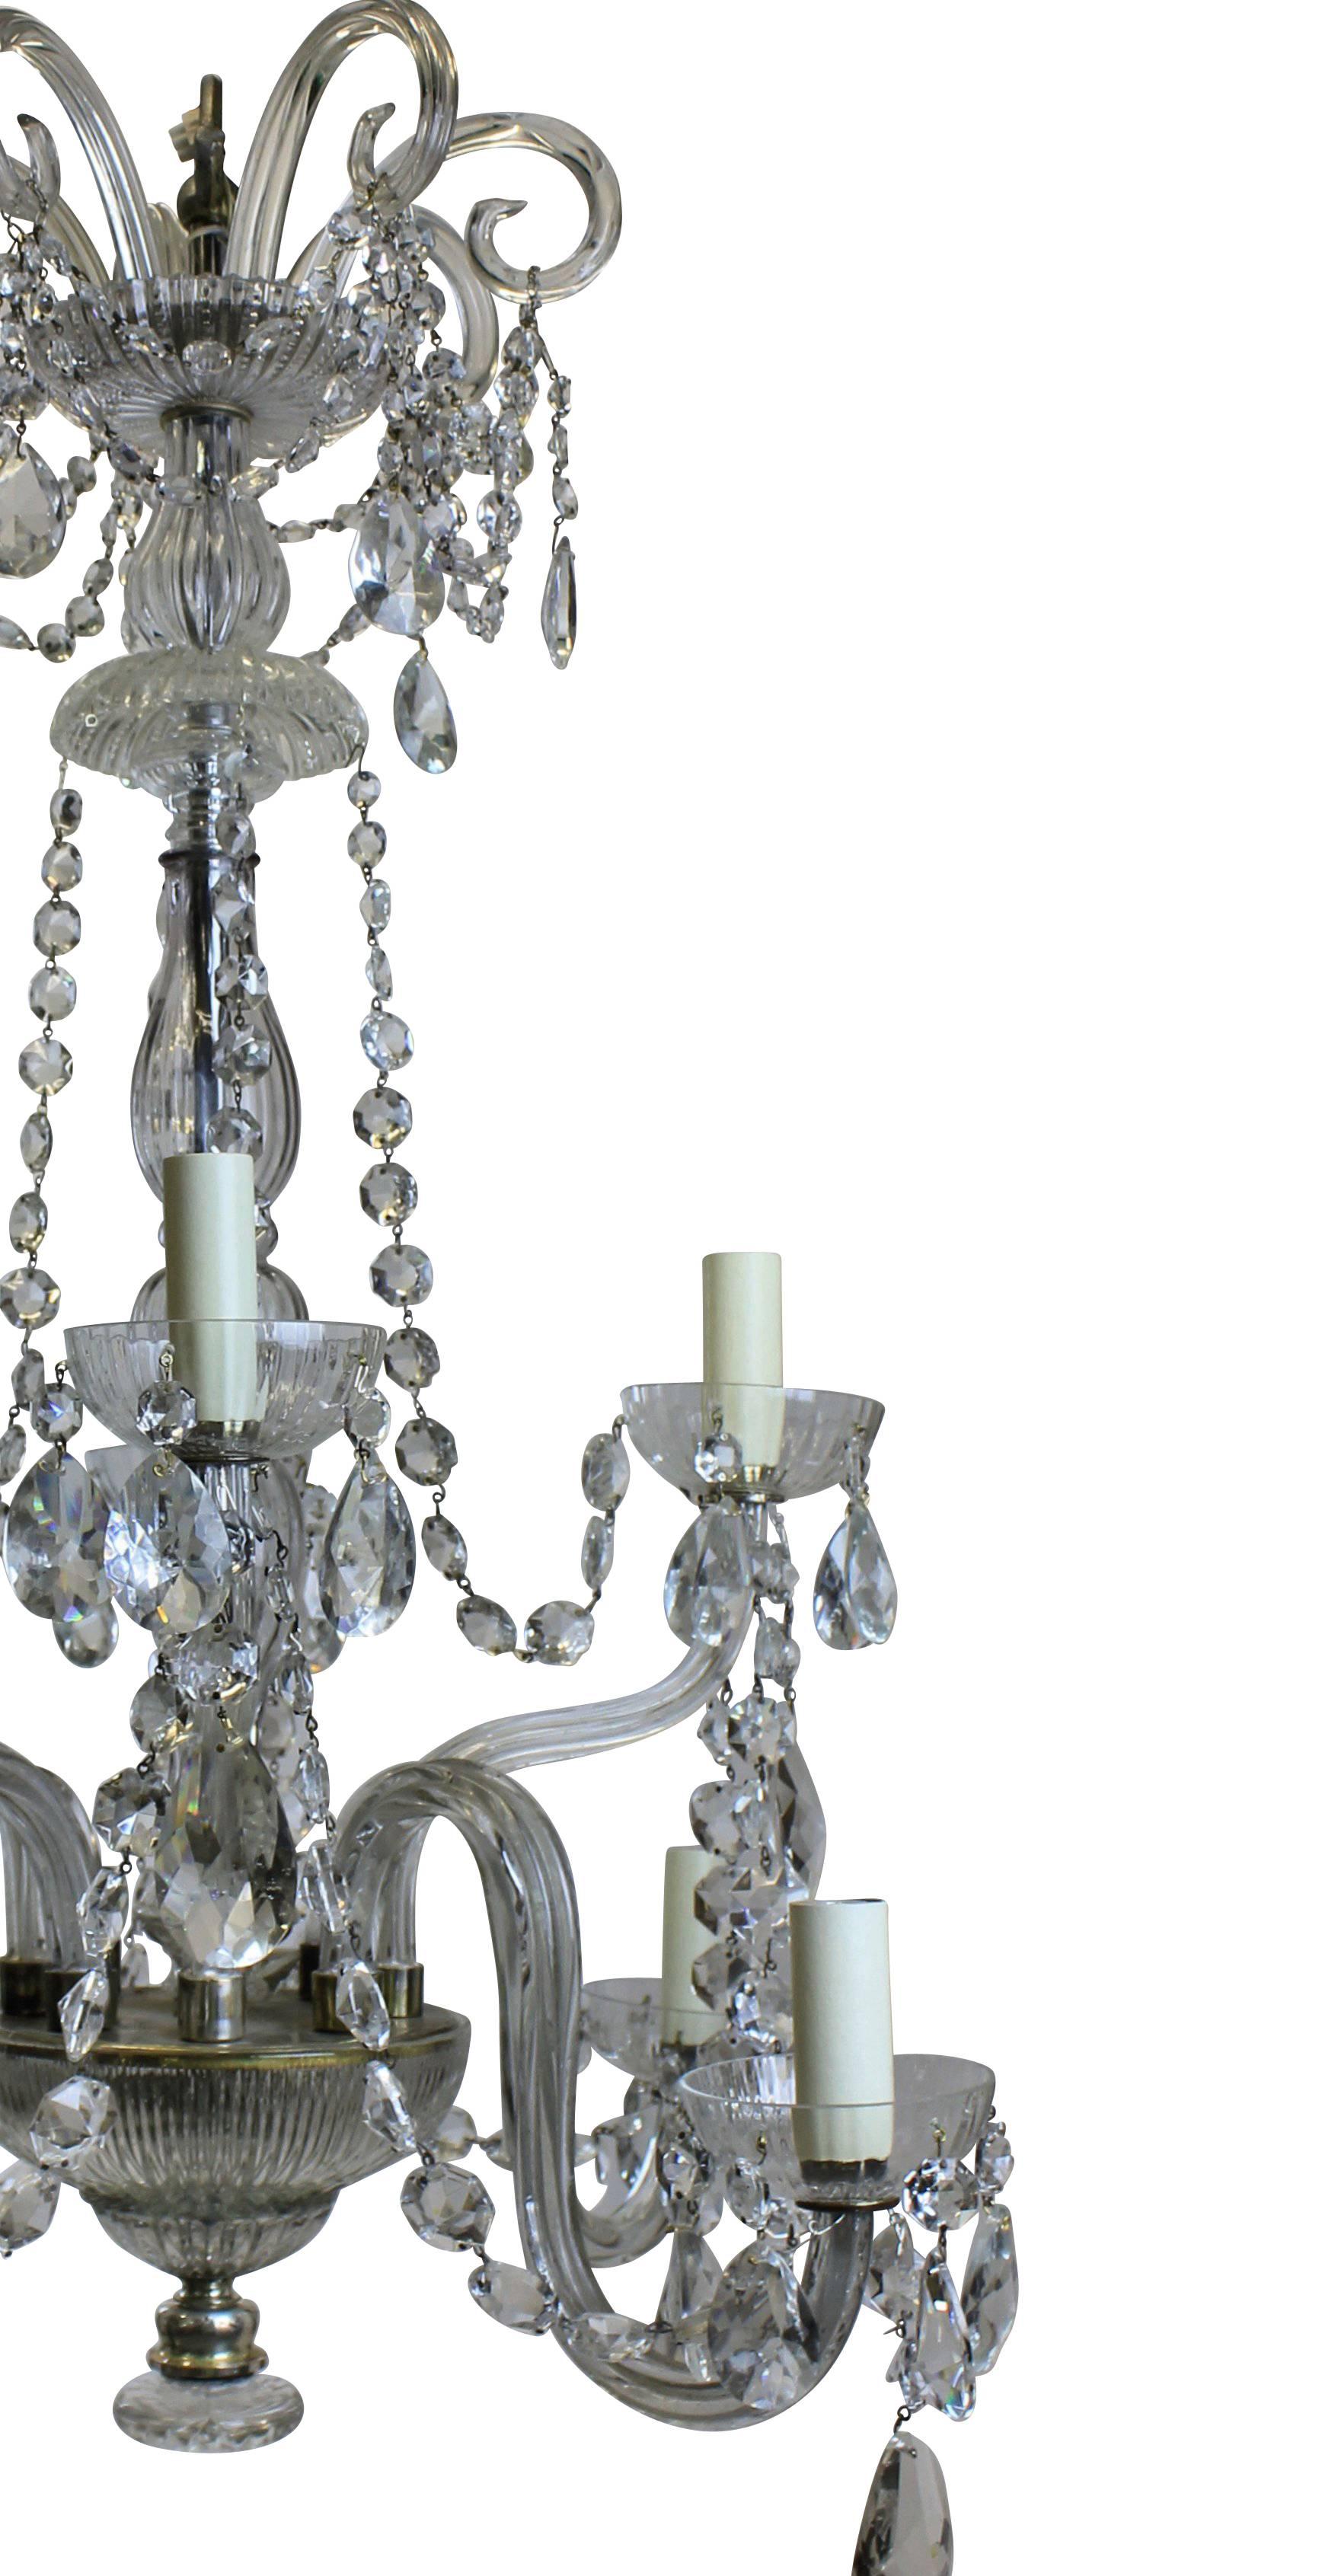 A French cut glass chandelier of good proportions, with scrolls and swags.